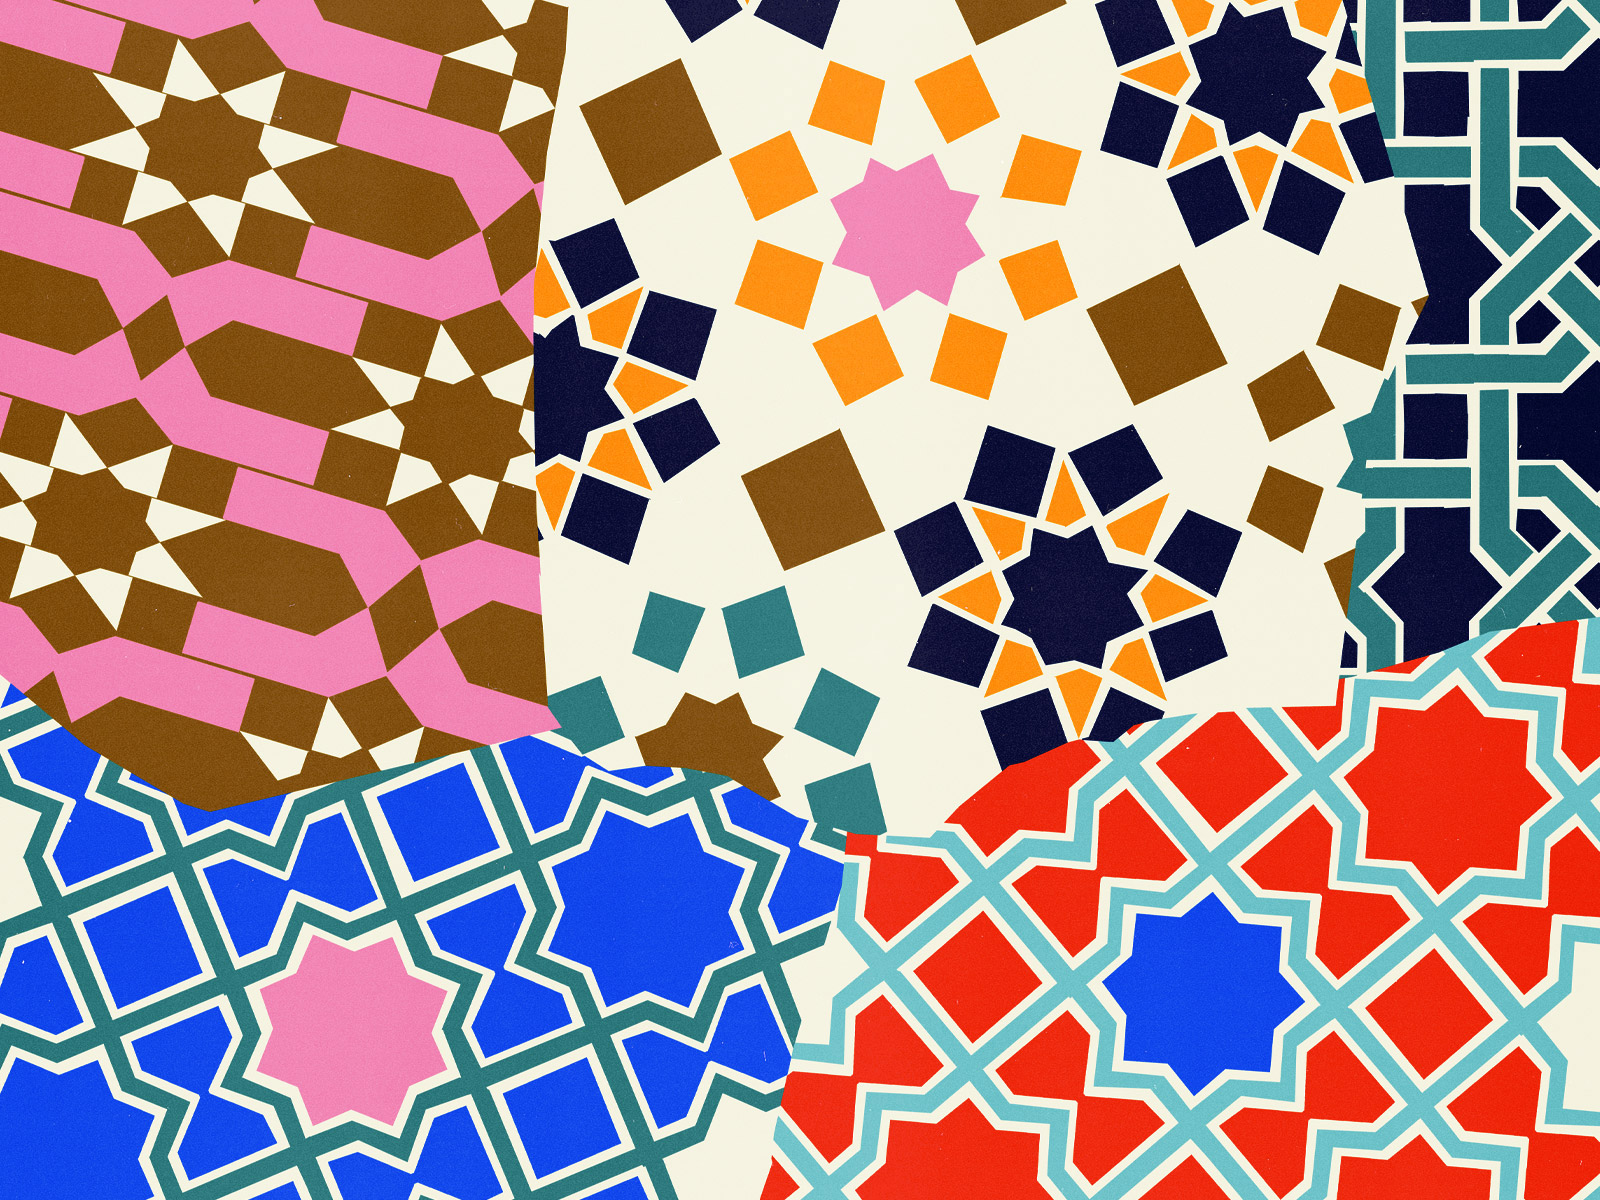 Istanbul tile patterns